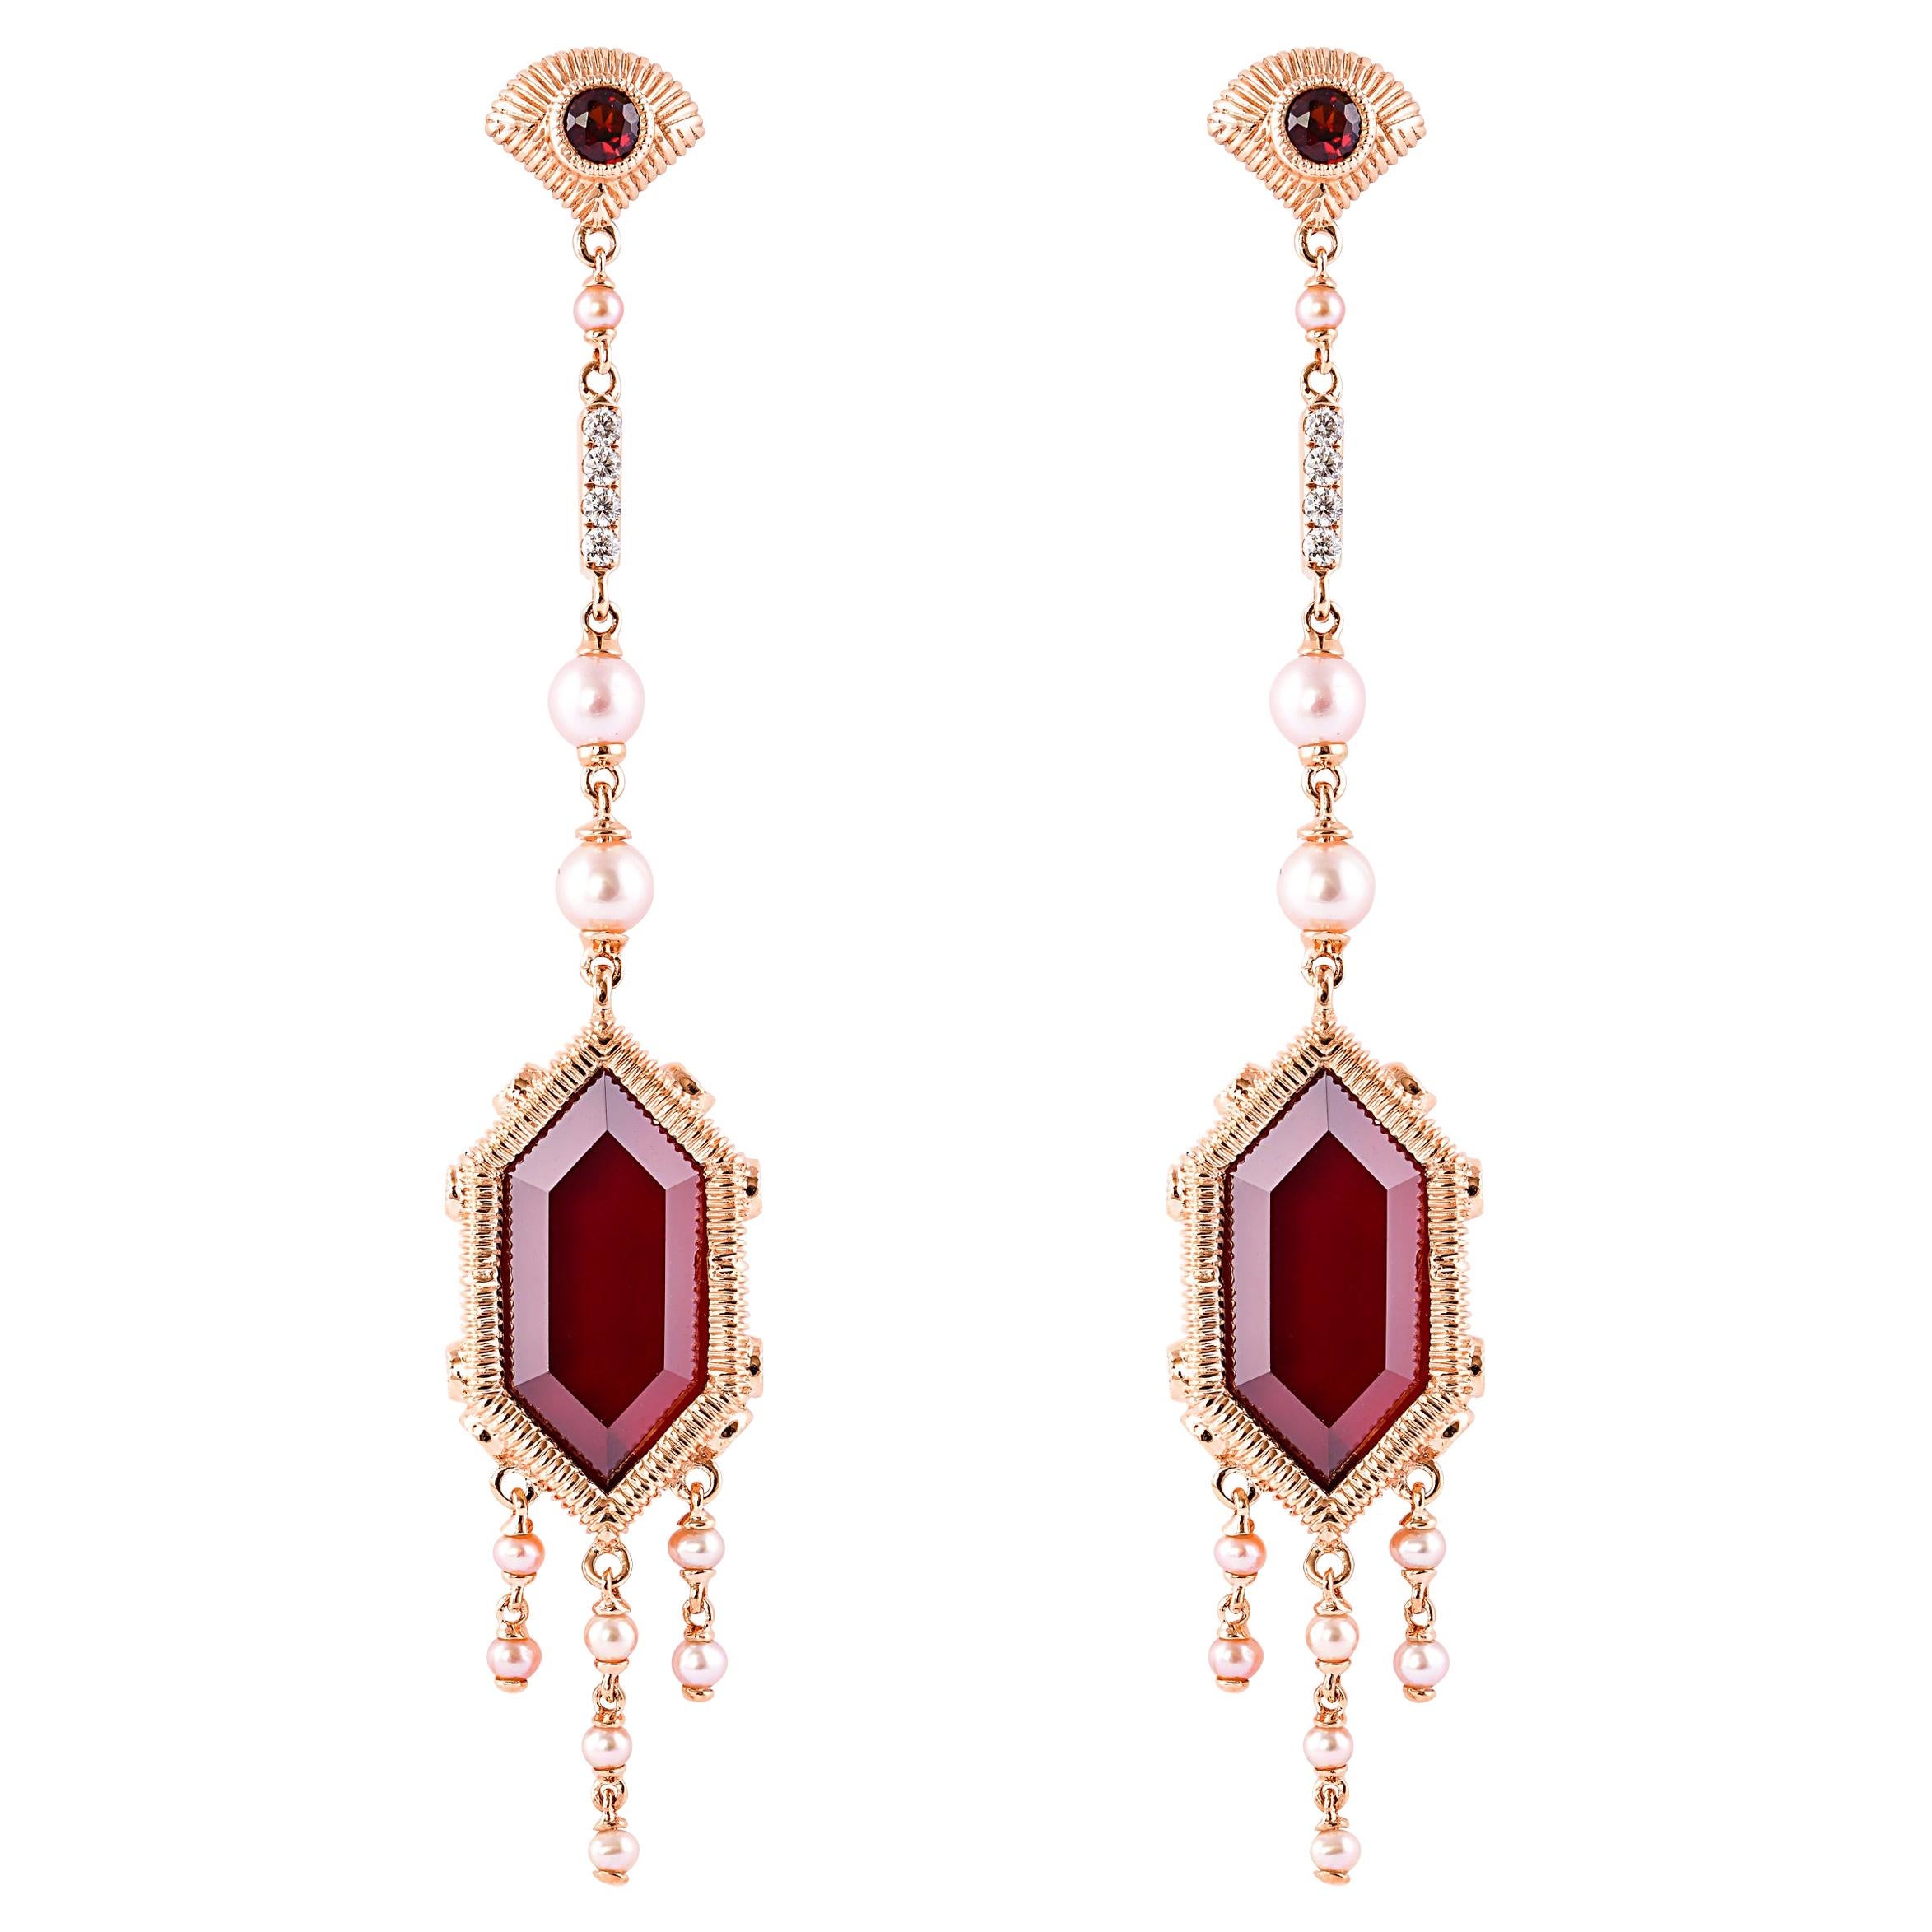 23.42 Carat Red Garnet Earring in 18 Karat Rose Gold with Diamonds and Pearls